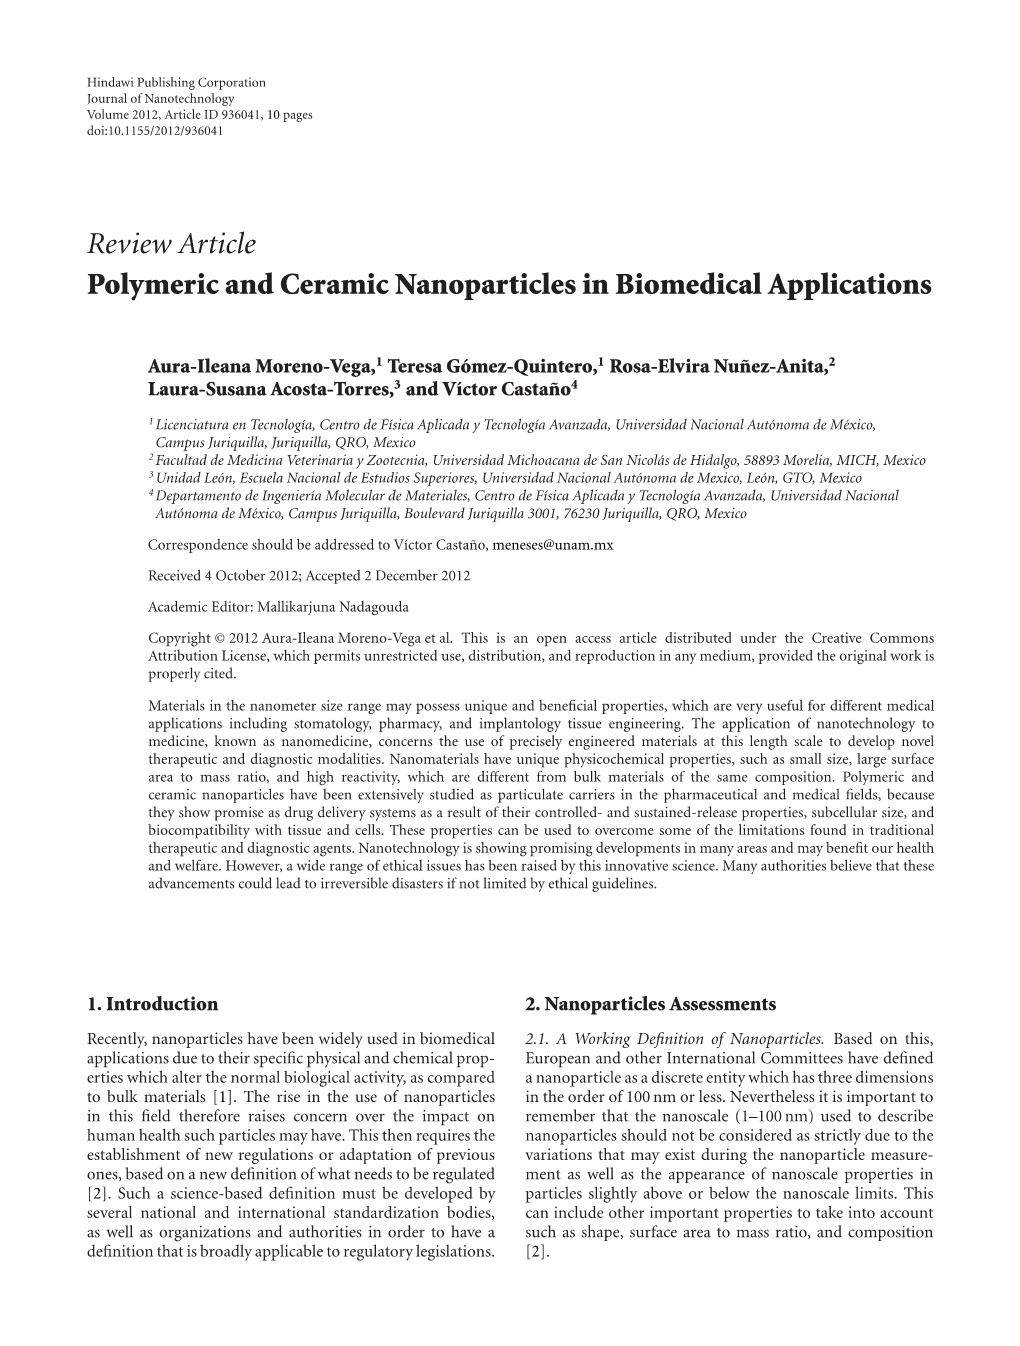 Polymeric and Ceramic Nanoparticles in Biomedical Applications